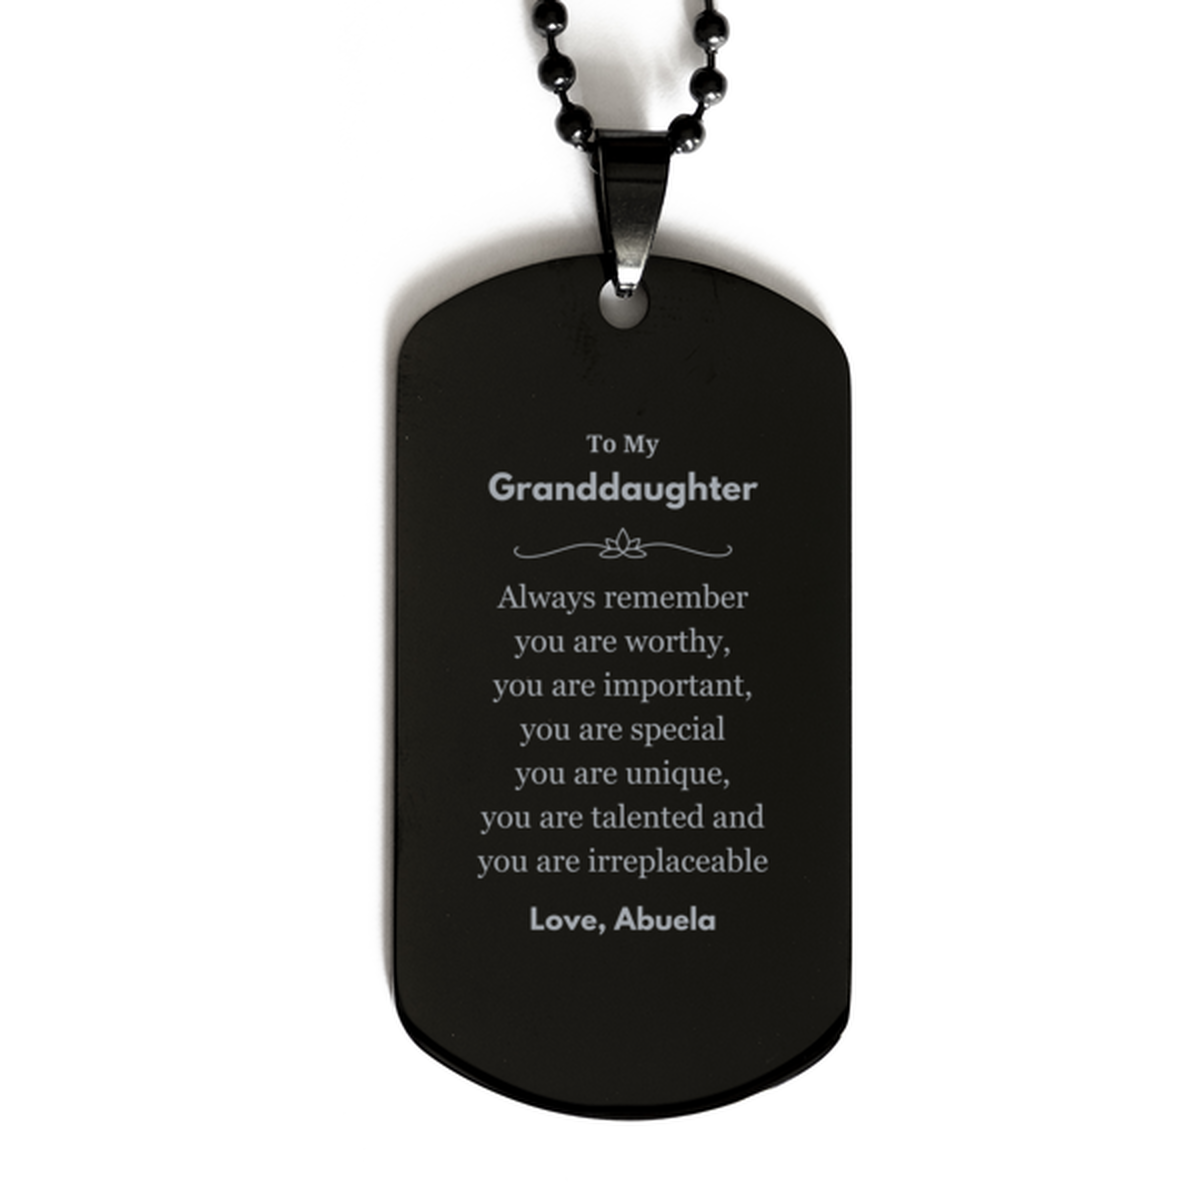 Granddaughter Birthday Gifts from Abuela, Inspirational Black Dog Tag for Granddaughter Christmas Graduation Gifts for Granddaughter Always remember you are worthy, you are important. Love, Abuela